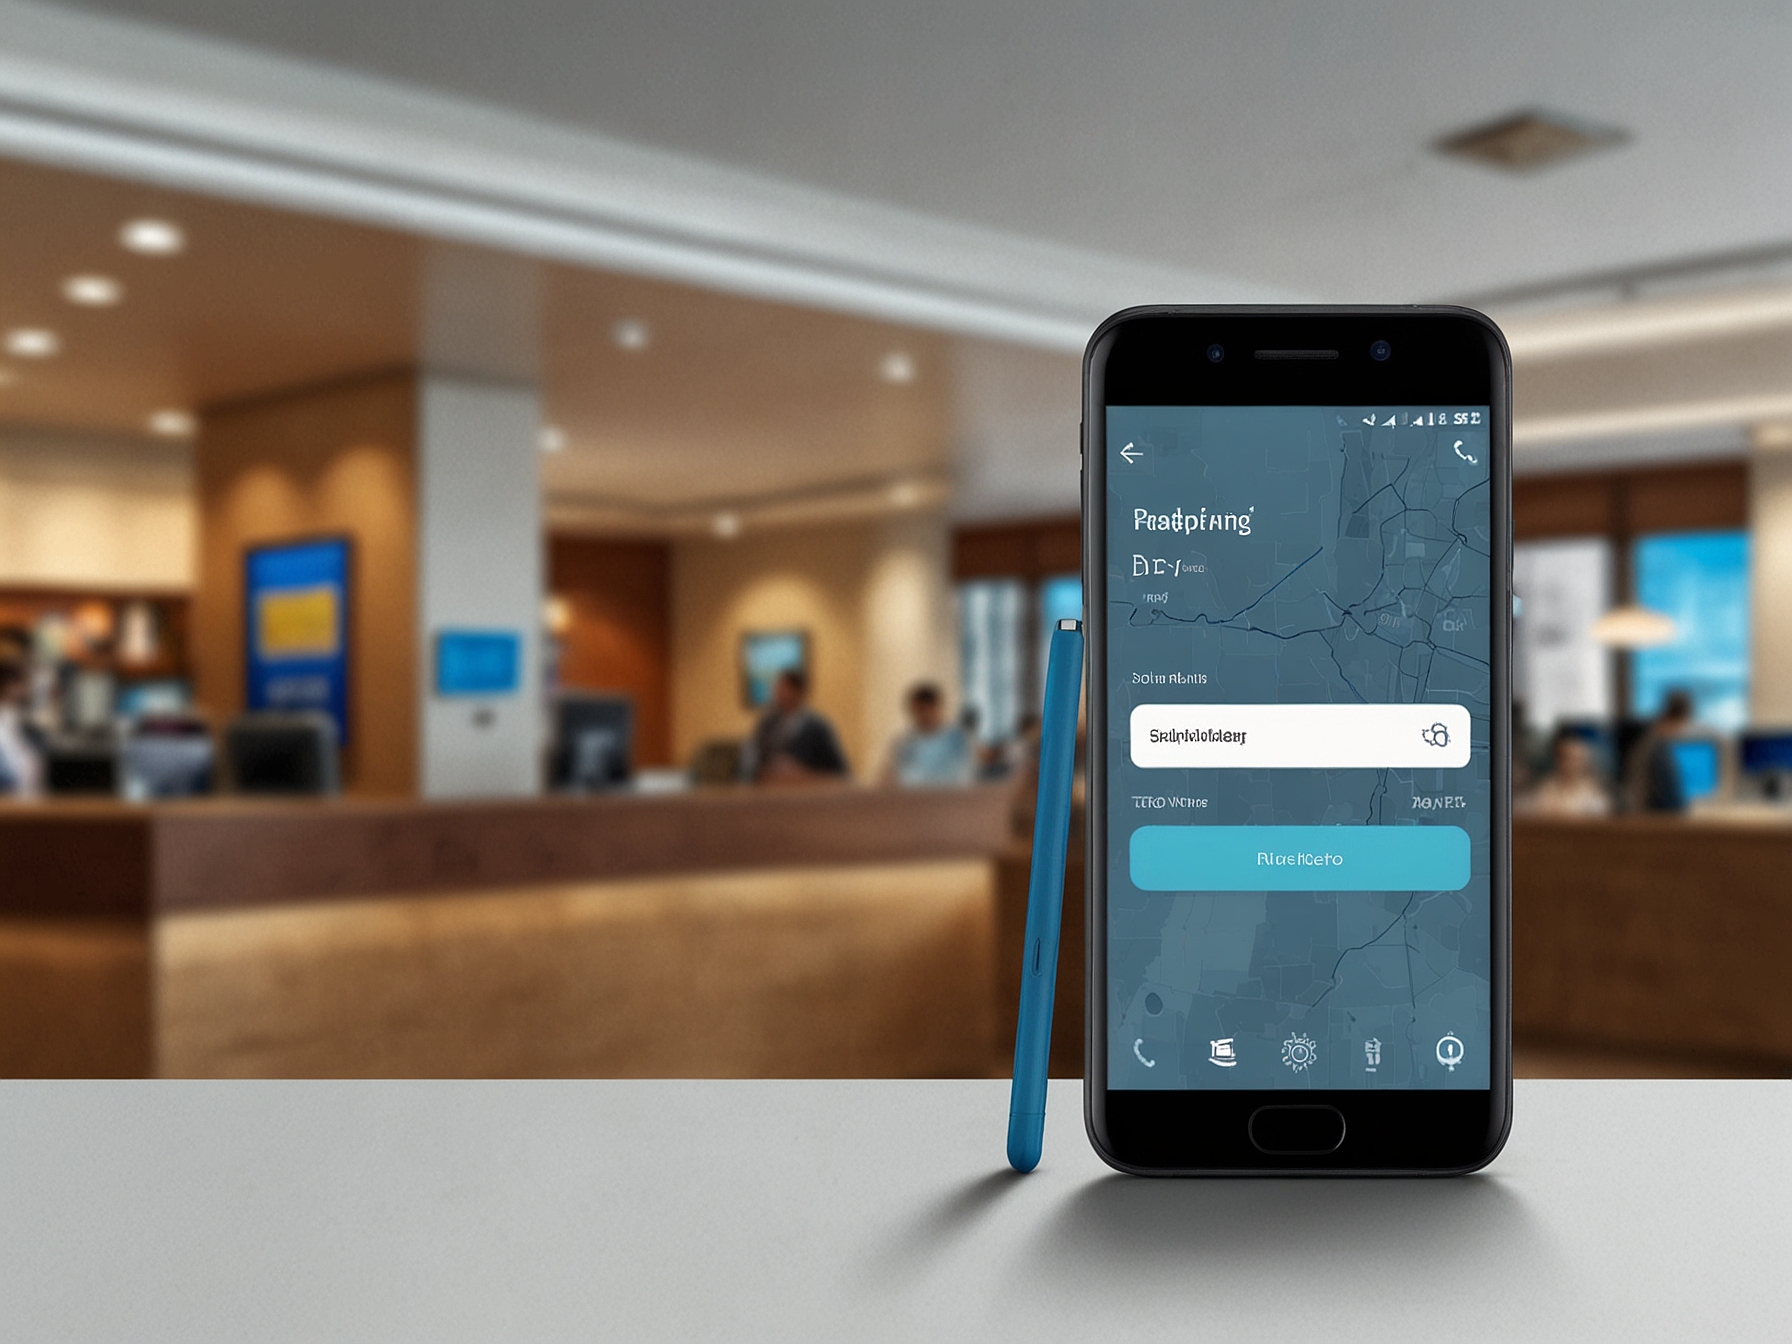 Samsung smartphone displaying the new Paytm wallet interface, showcasing travel and entertainment services integration.